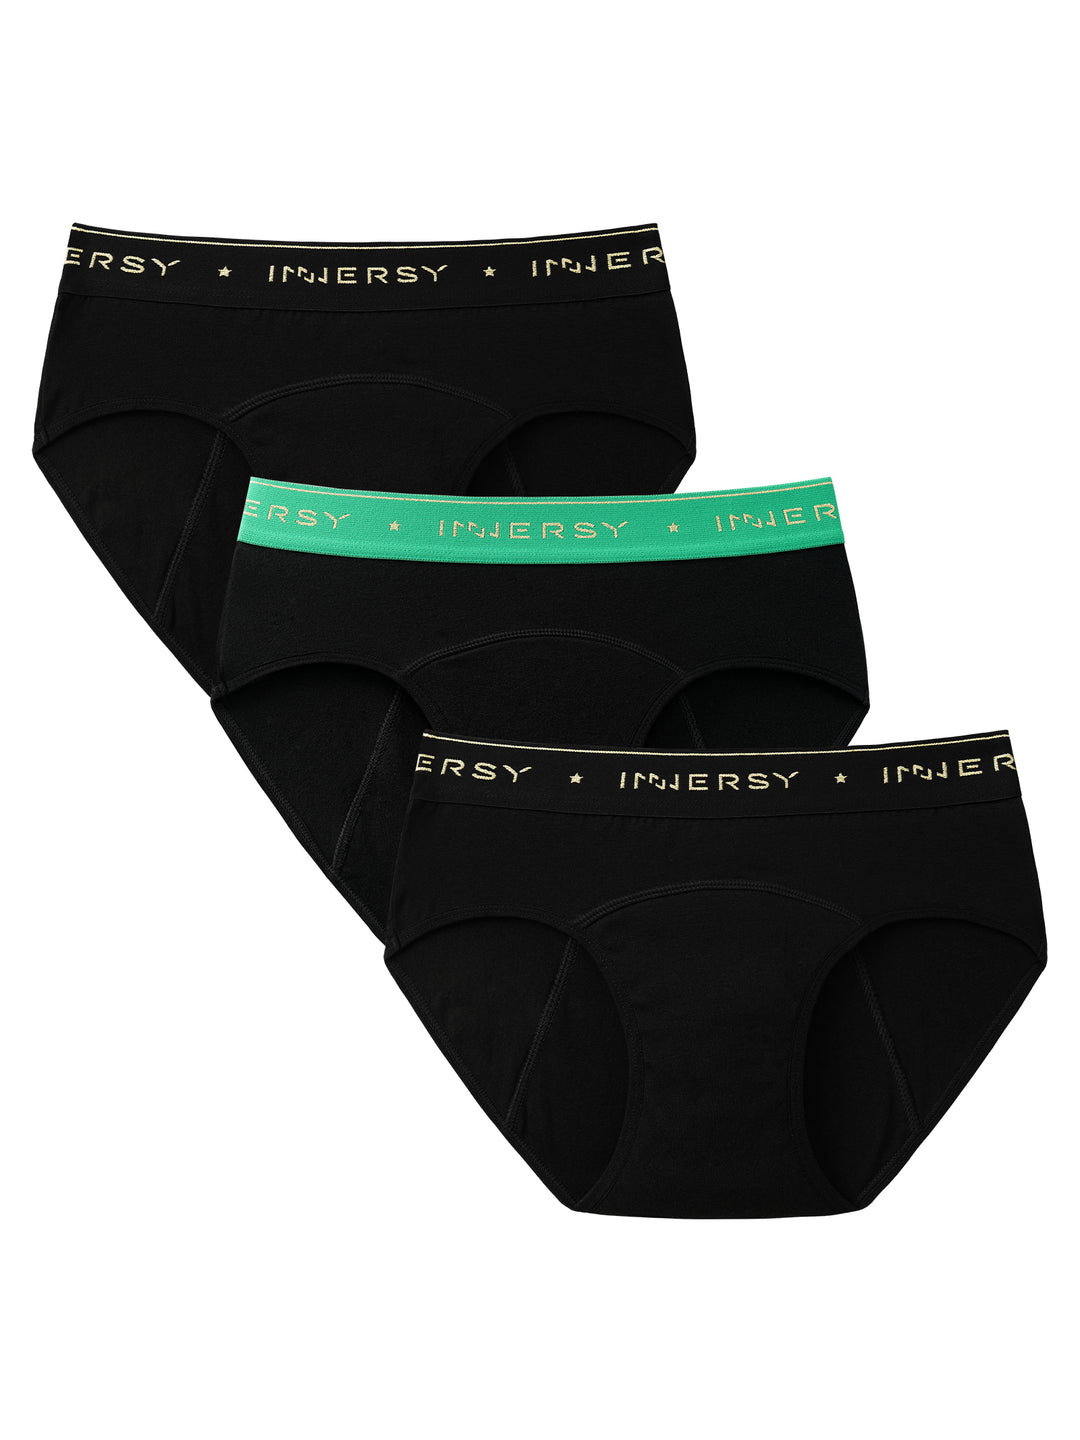 INNERSY Big Girls Underwear Soft Cotton Briefs Mid-Rise Panties for Teen  Girls 6 Pack (L(12-14 yrs), Black with Colorful Band)